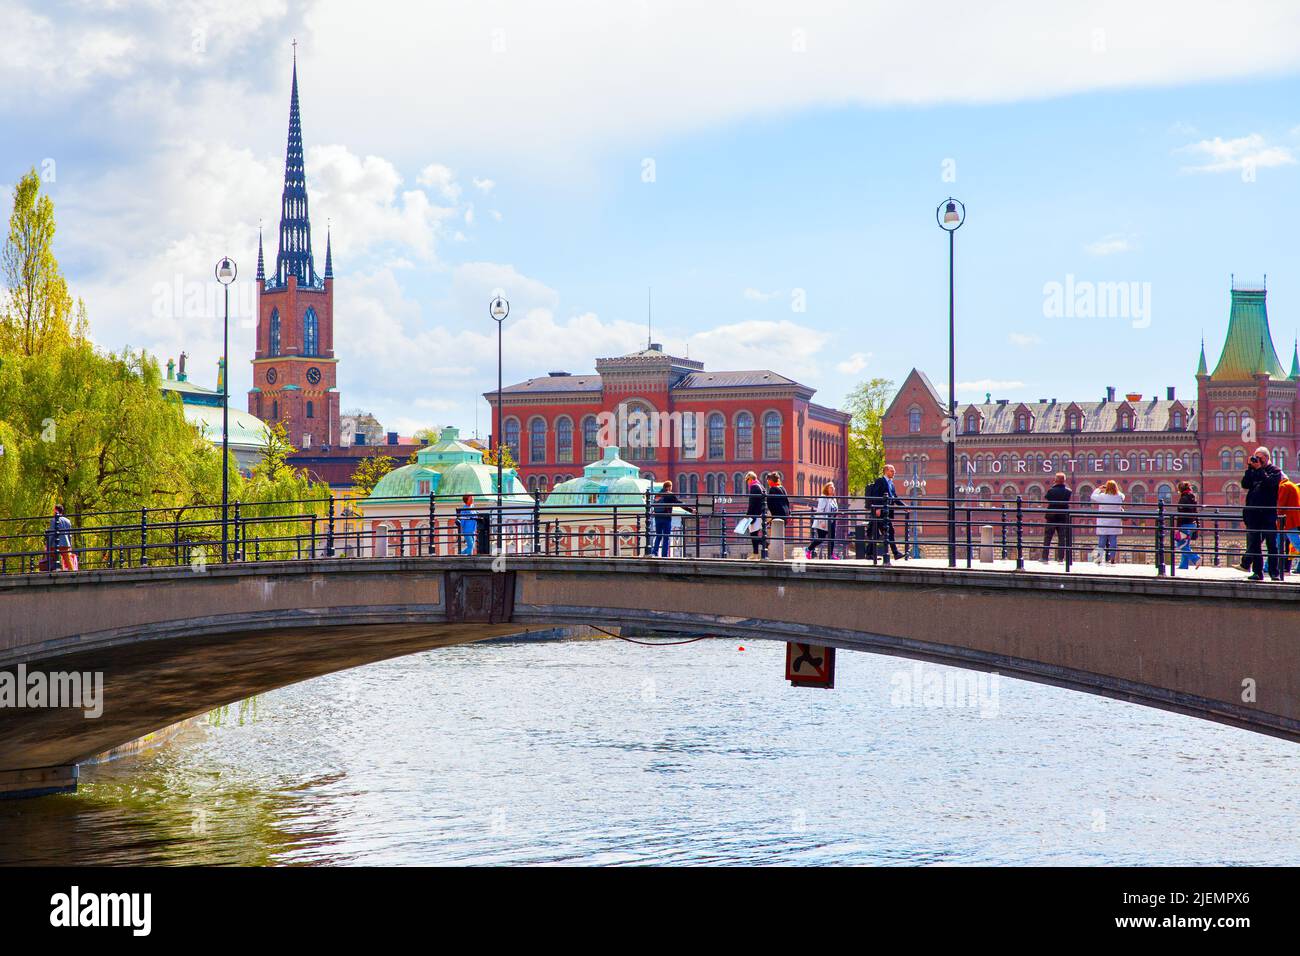 Stockholm, Sweden - May 21, 2015: Pedestrian bridge with walking people in Stockholm Stock Photo